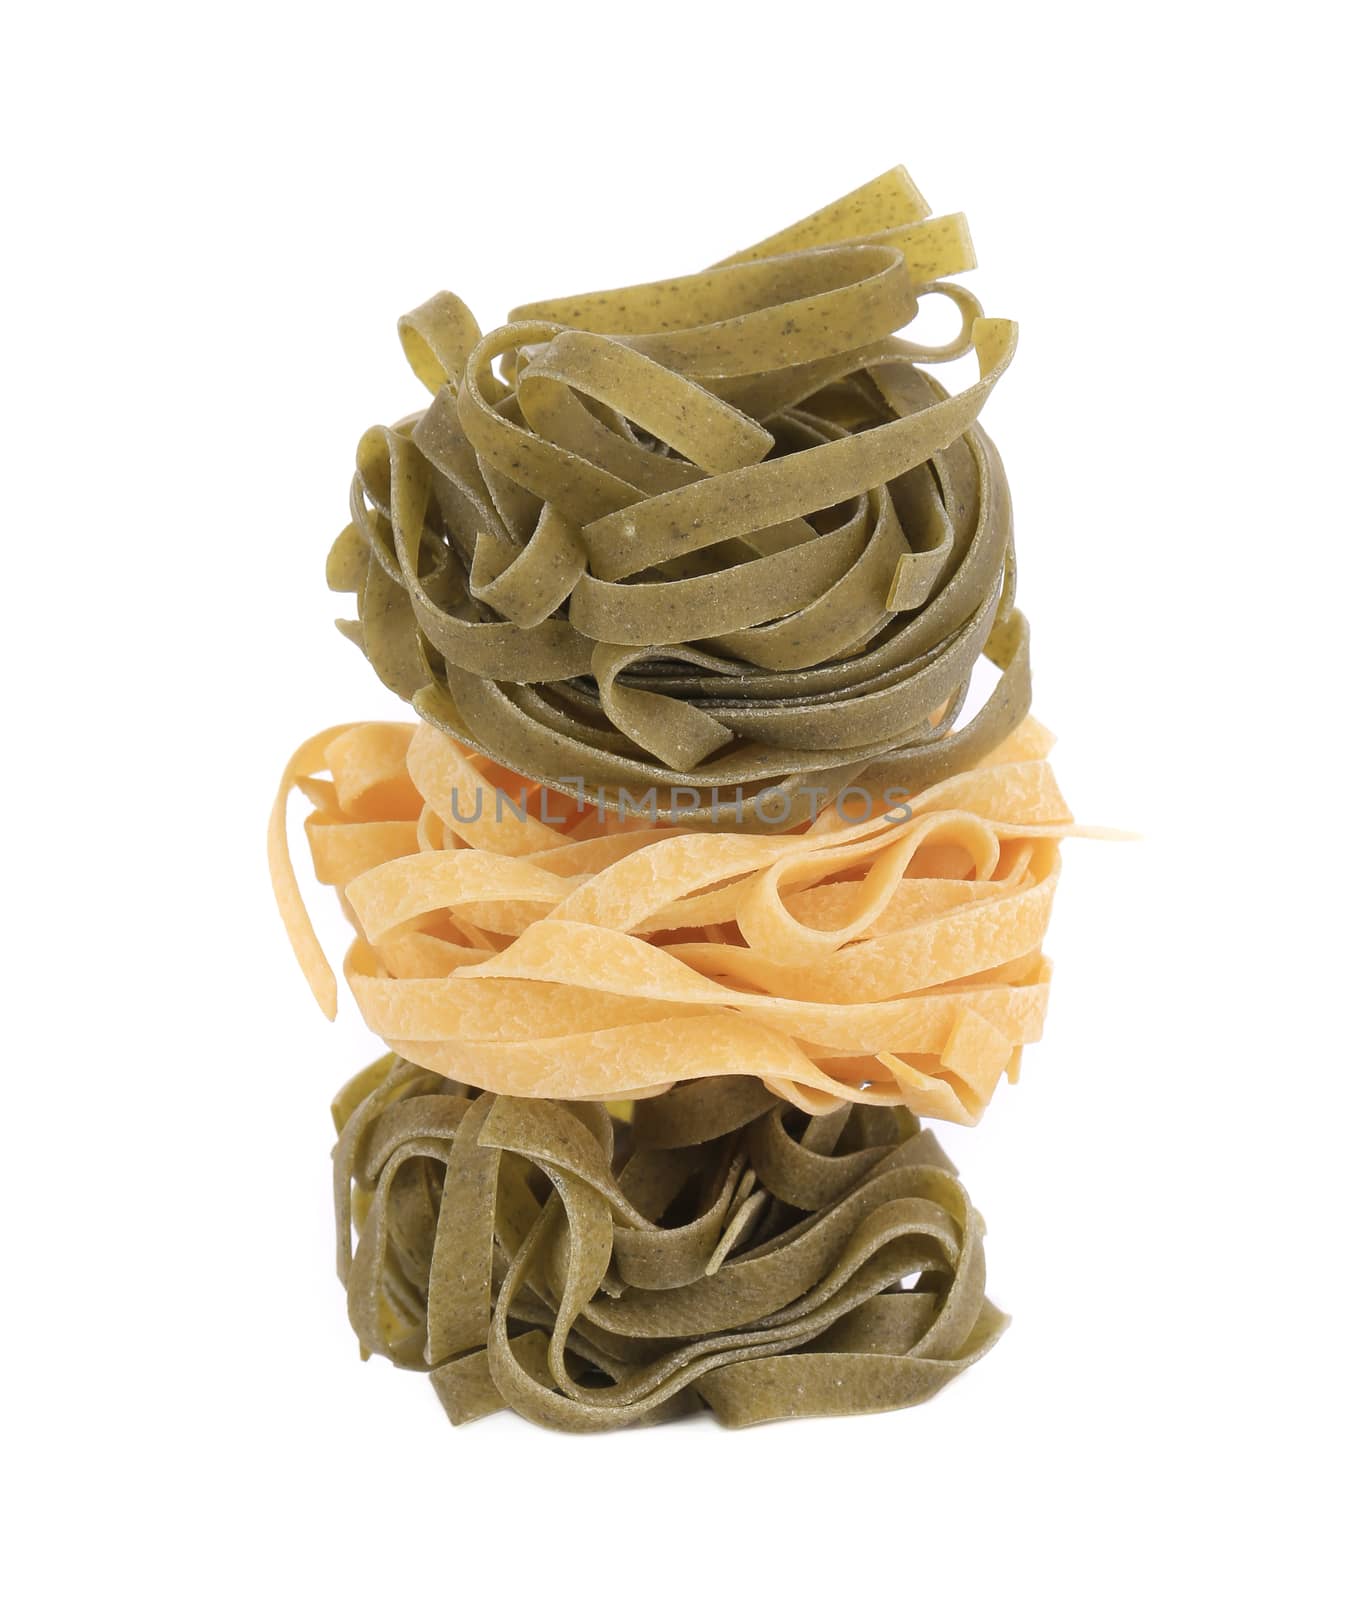 Stack of tagliatelle italian pasta. Isolated on a white background.